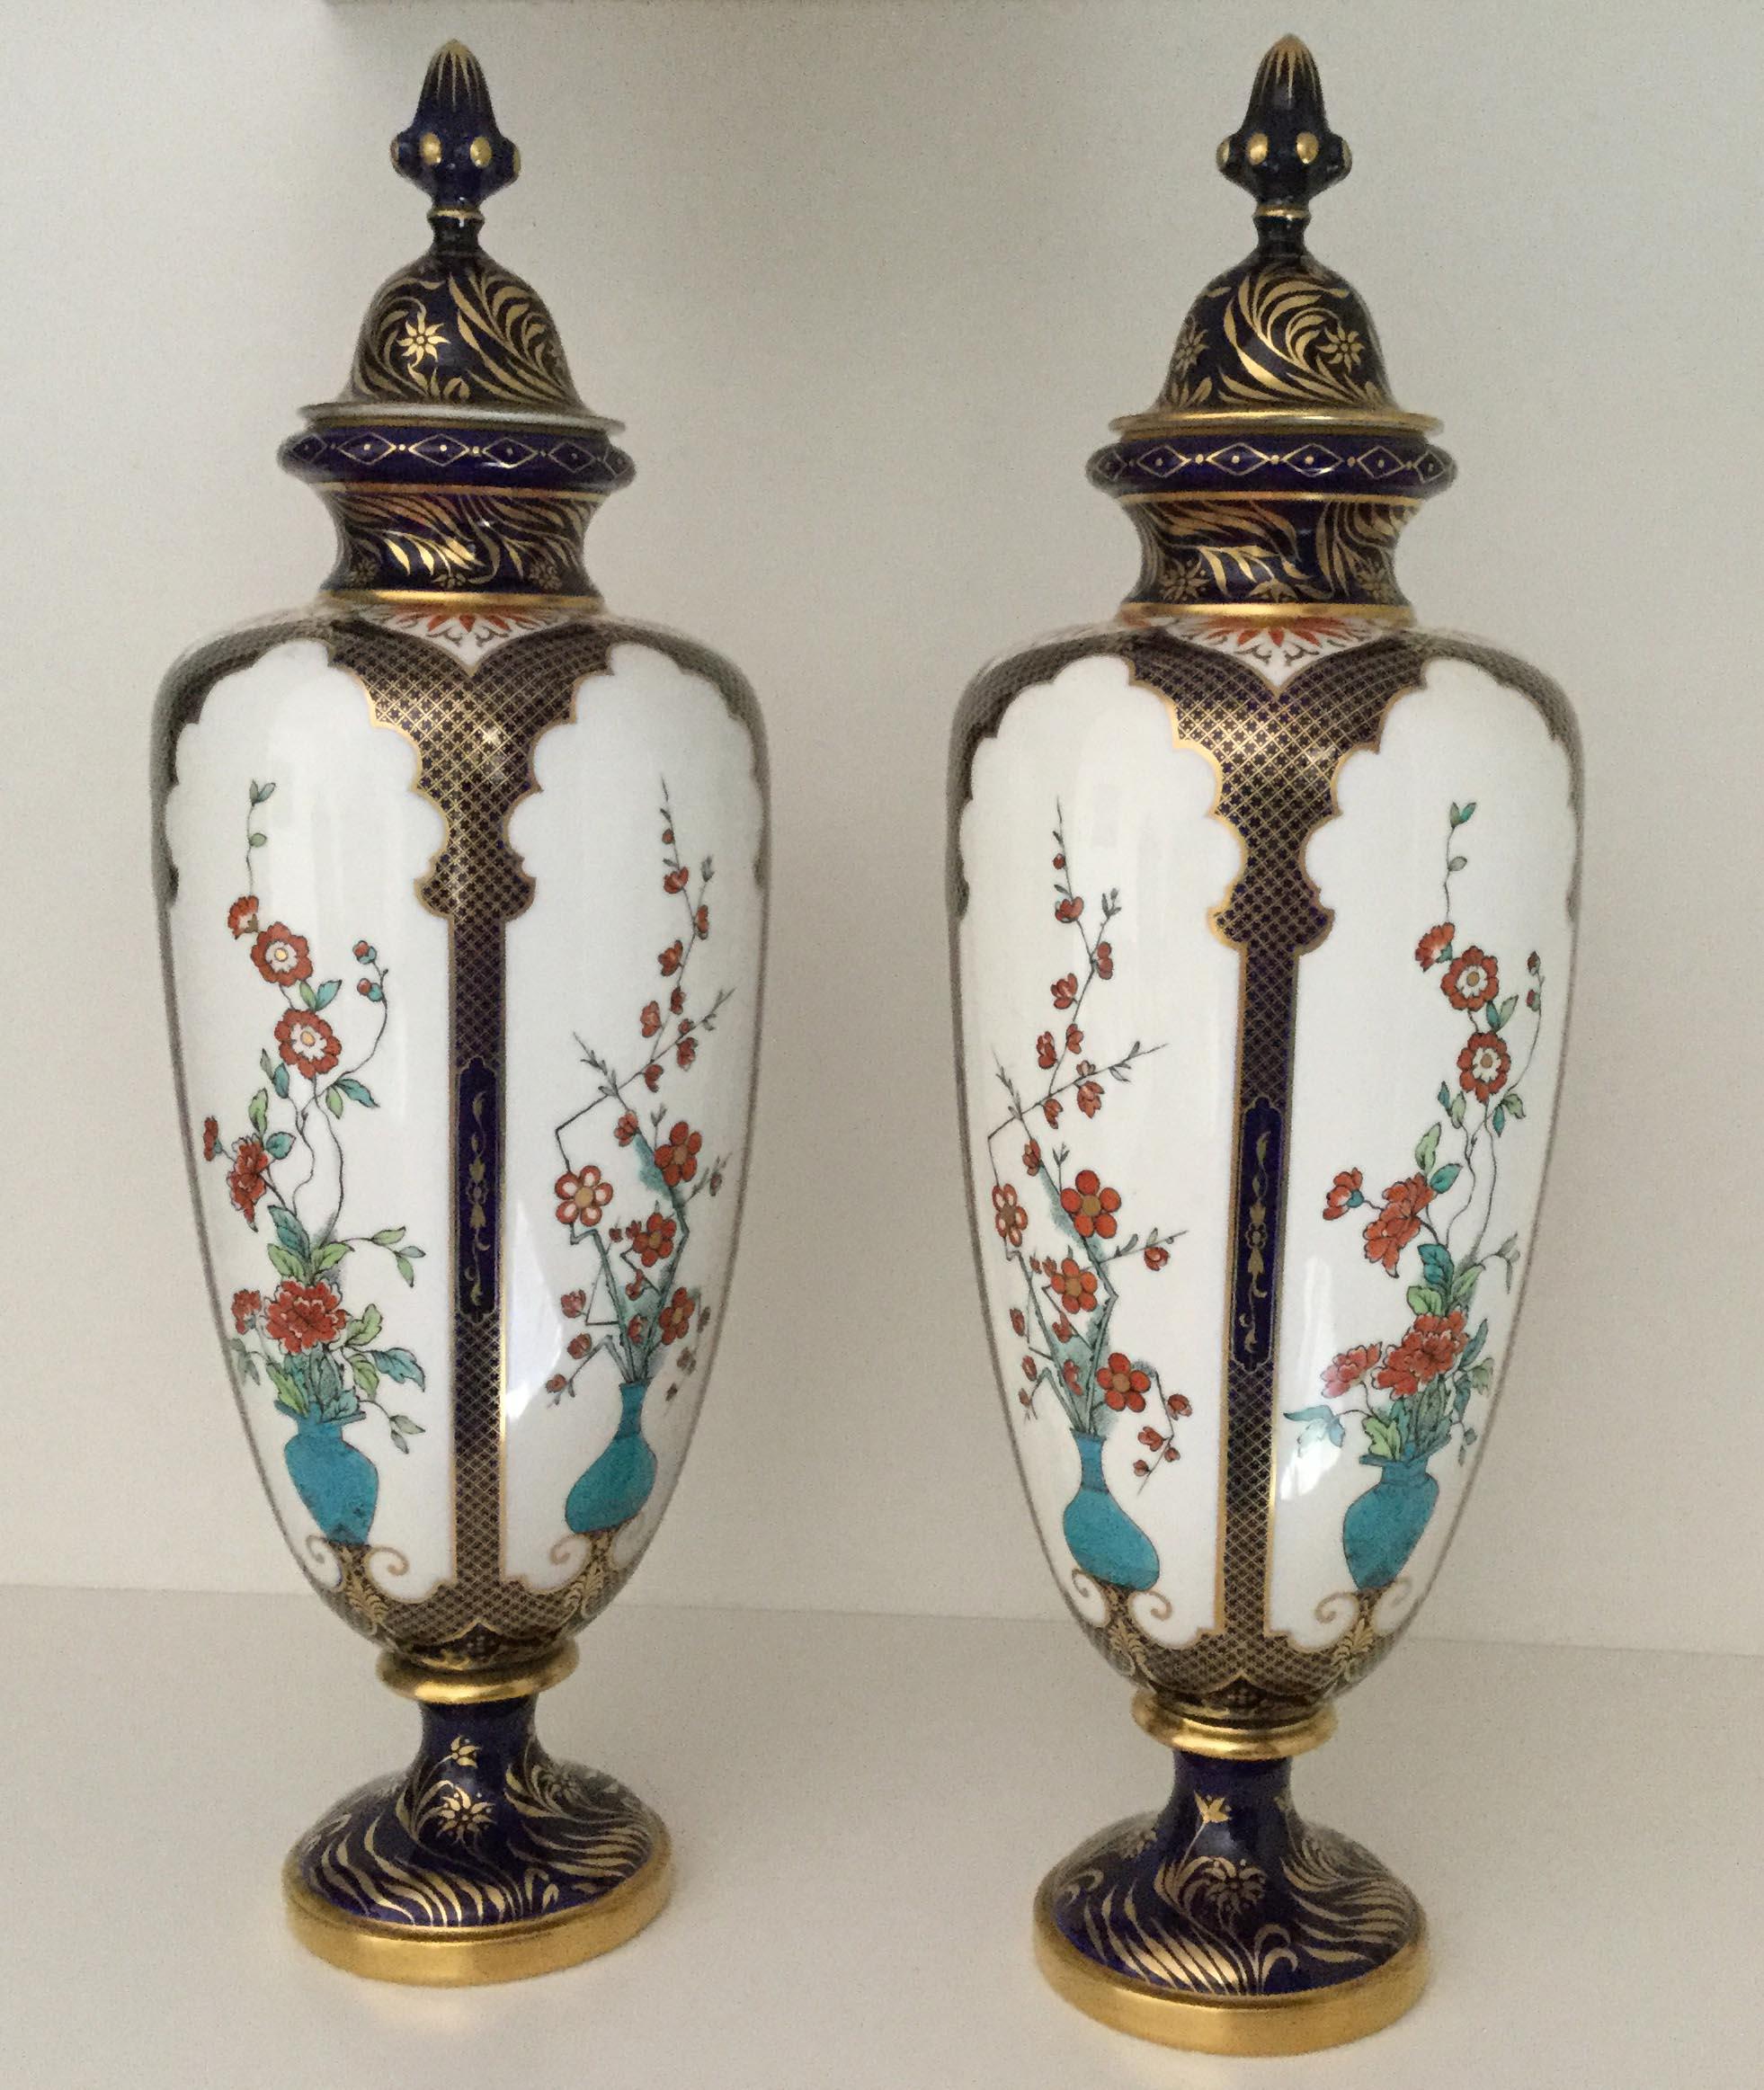 British Pair of Royal Worcester Japonesque Vases, Dated 1896-1897 For Sale